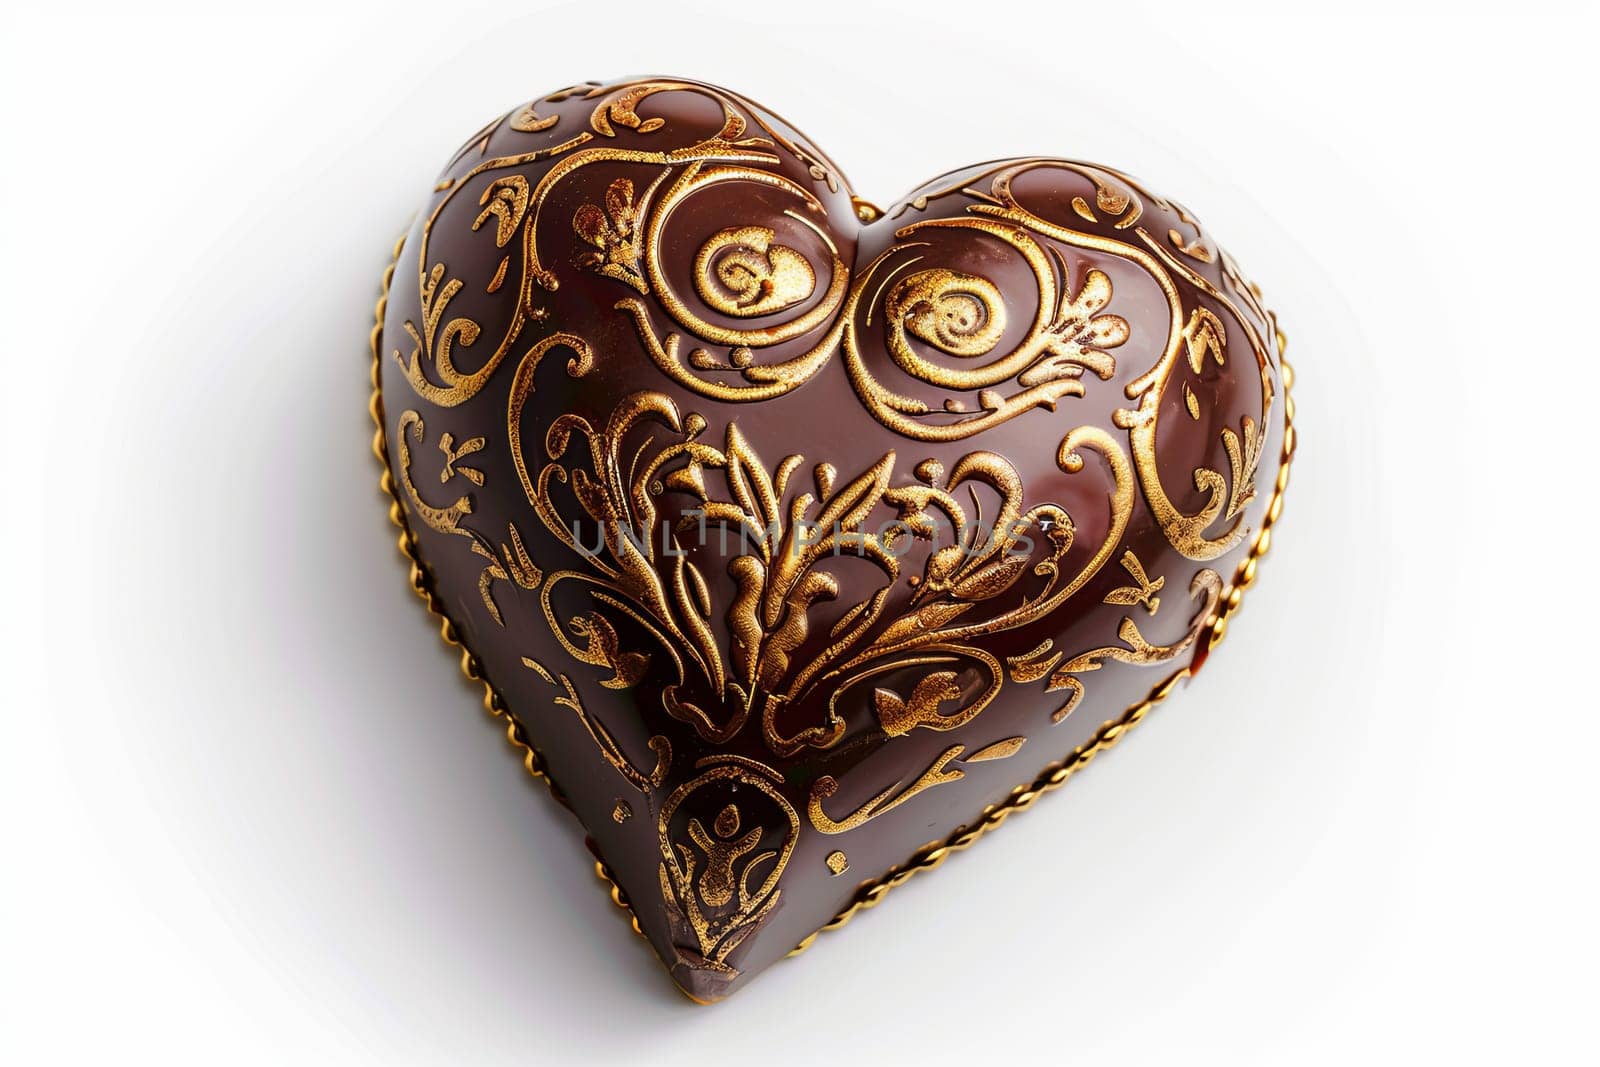 Heart-shaped chocolate box with gold decorative pattern on a white background.